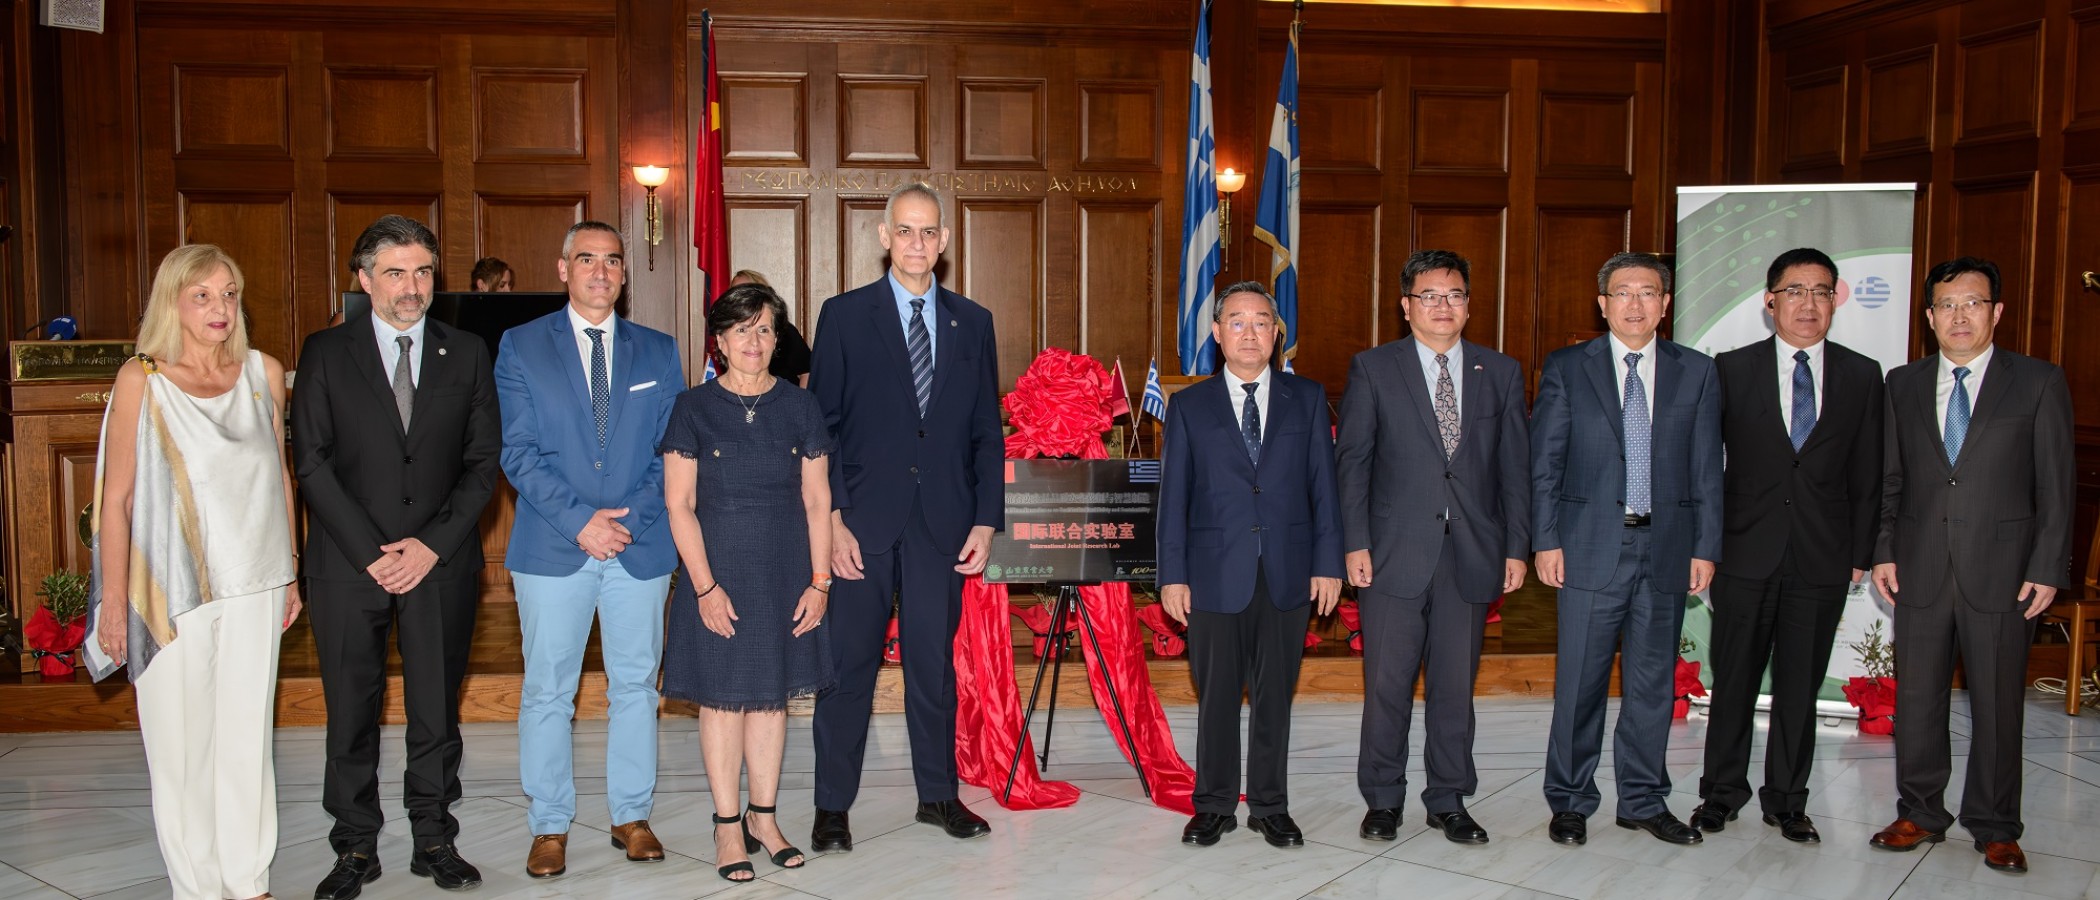 The AUA has been collaborating with Research and Education Organizations of the People's Republic of China on digitalization issues and utilization of digital technologies in the Agrifood Sector